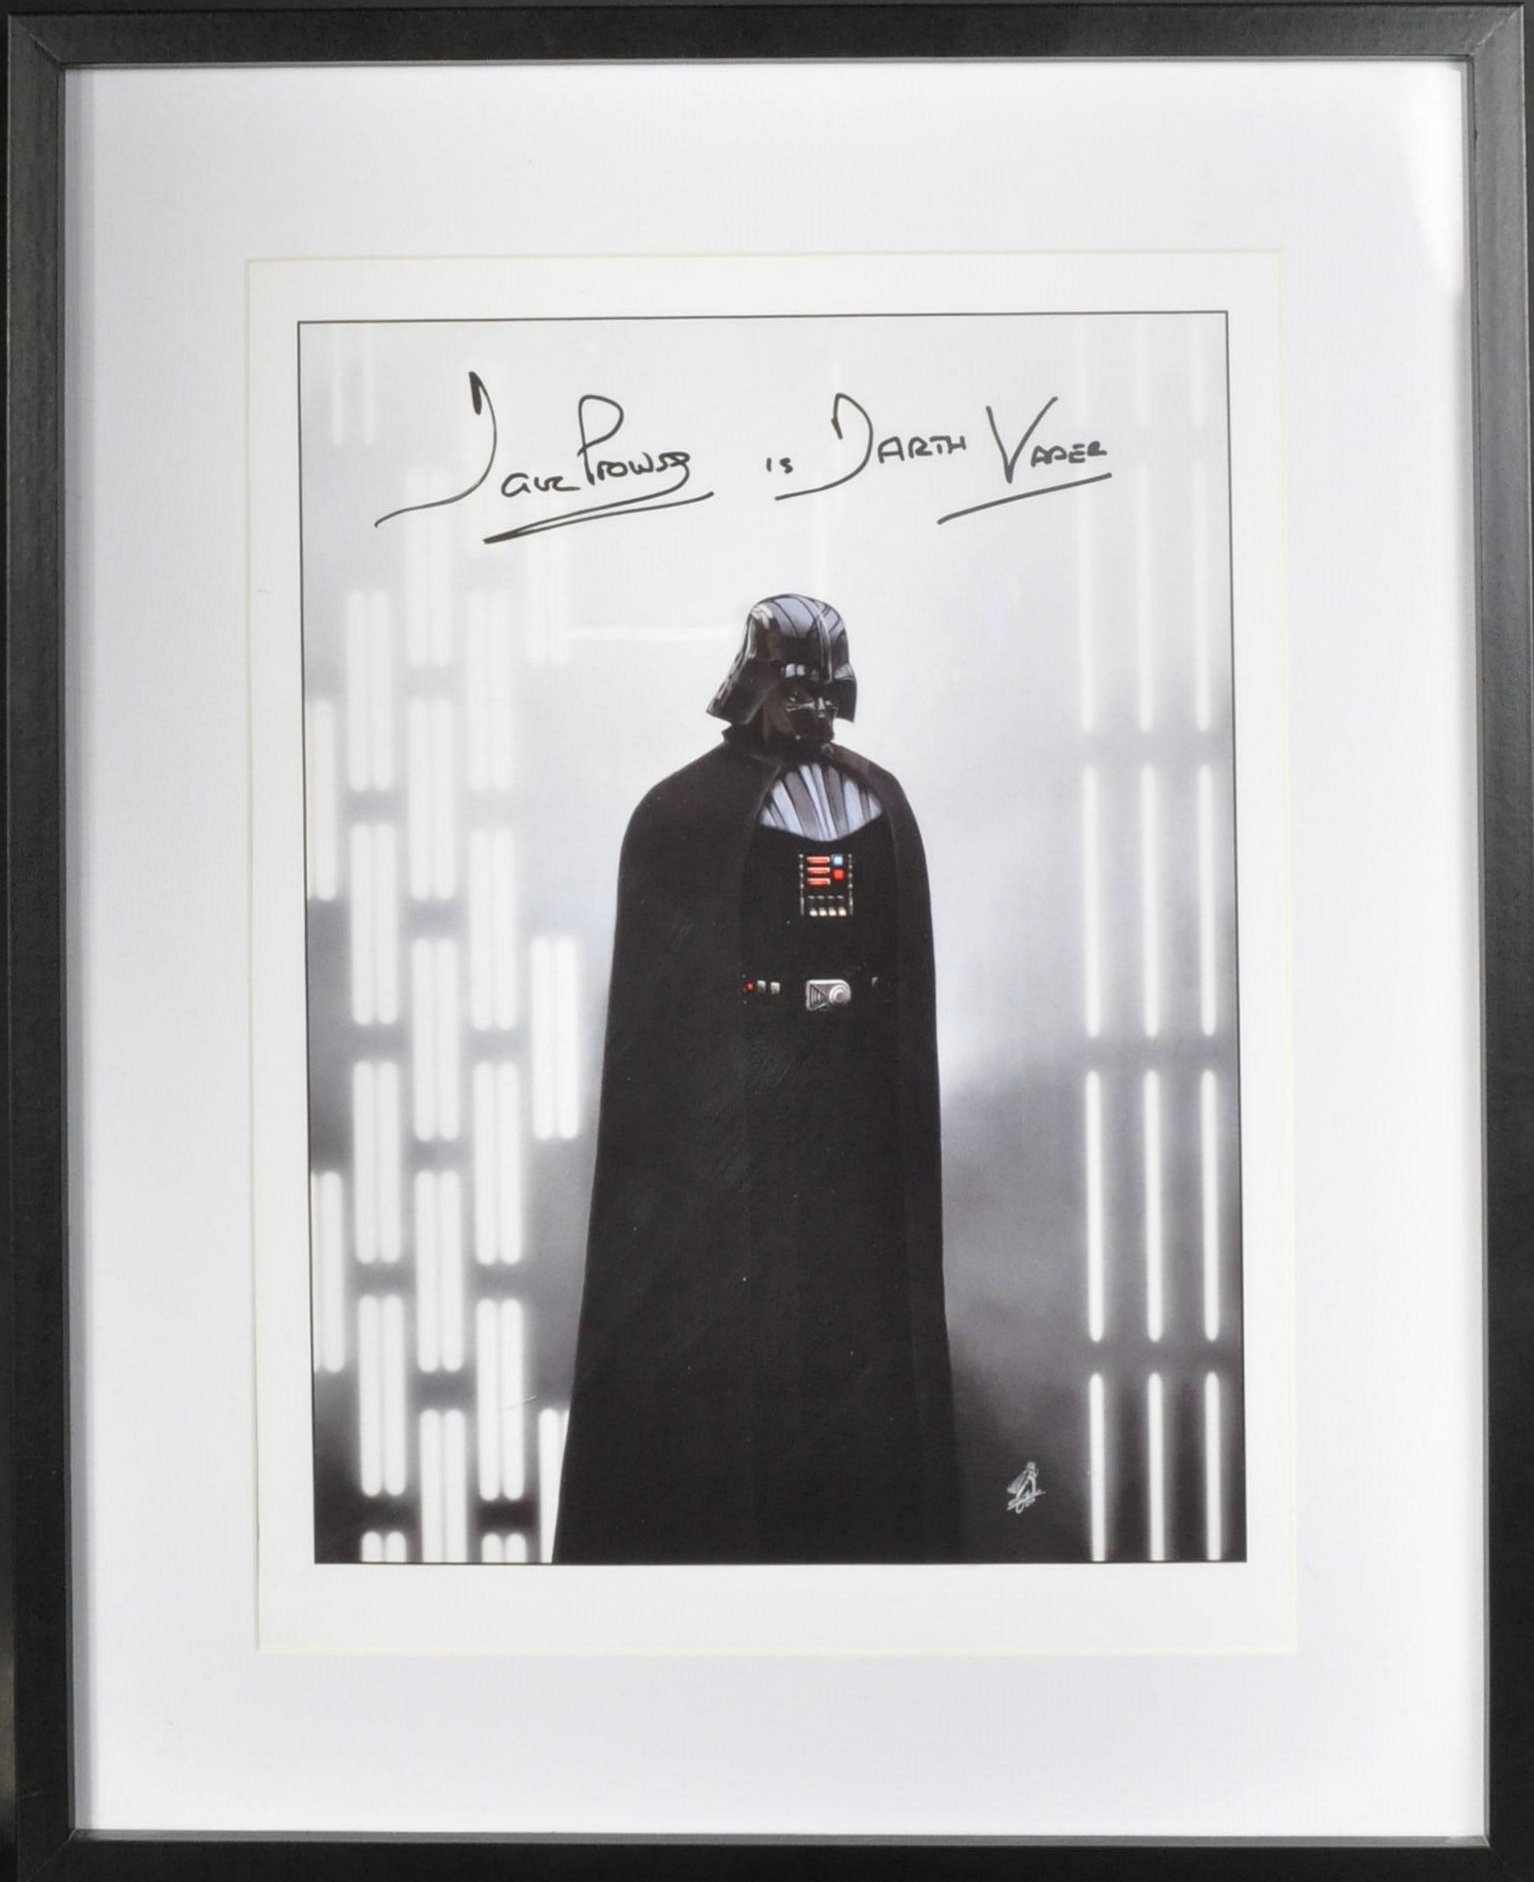 ESTATE OF DAVE PROWSE - AUTOGRAPHED ARWORK PRINT - Image 2 of 5